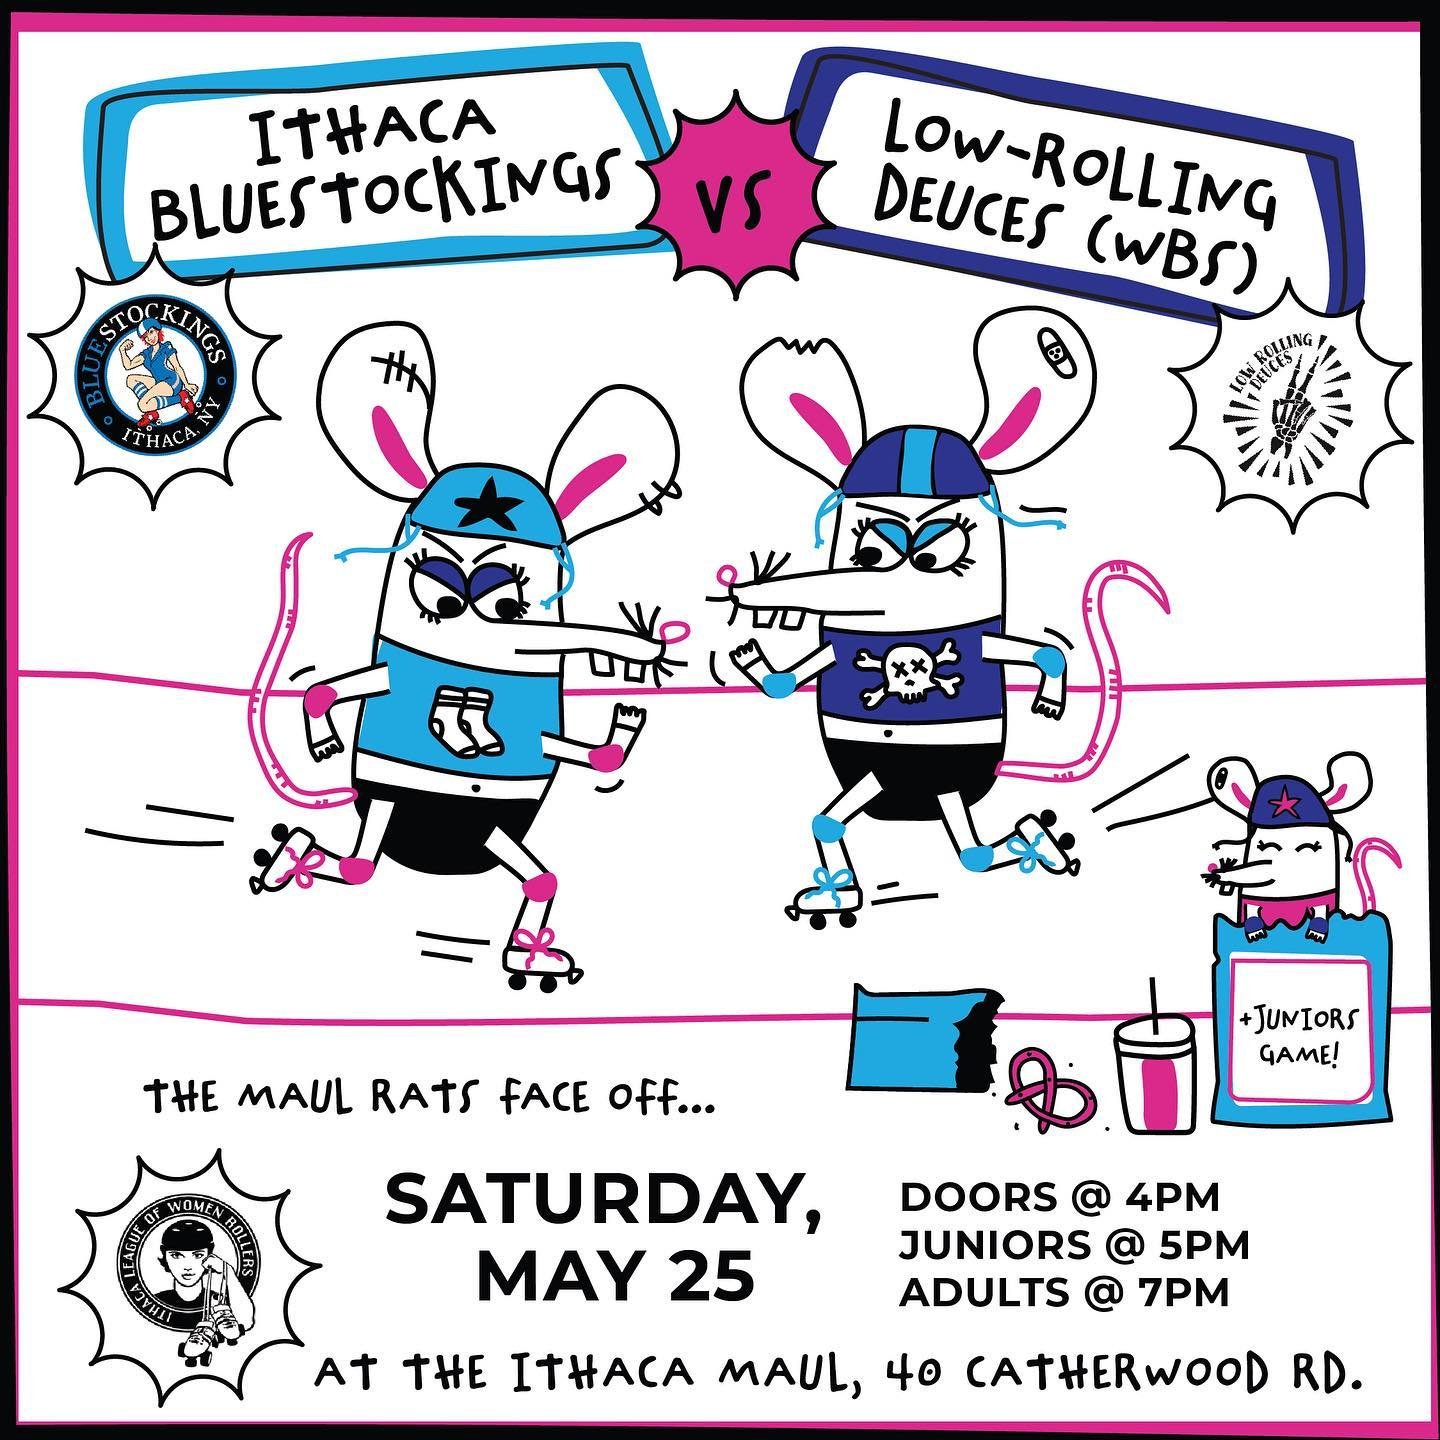 On May 25th the ILWR BlueStockings face off against the WBSRD Low Rolling Dueces after a riveting Junior Rollers game! Doors open at 4pm, first whistle at  5pm (Juniors) and 7pm (ILWR vs WBSRD)

Tickets: link 🔗 in bio
Adults: $8 preorder, $10 at the